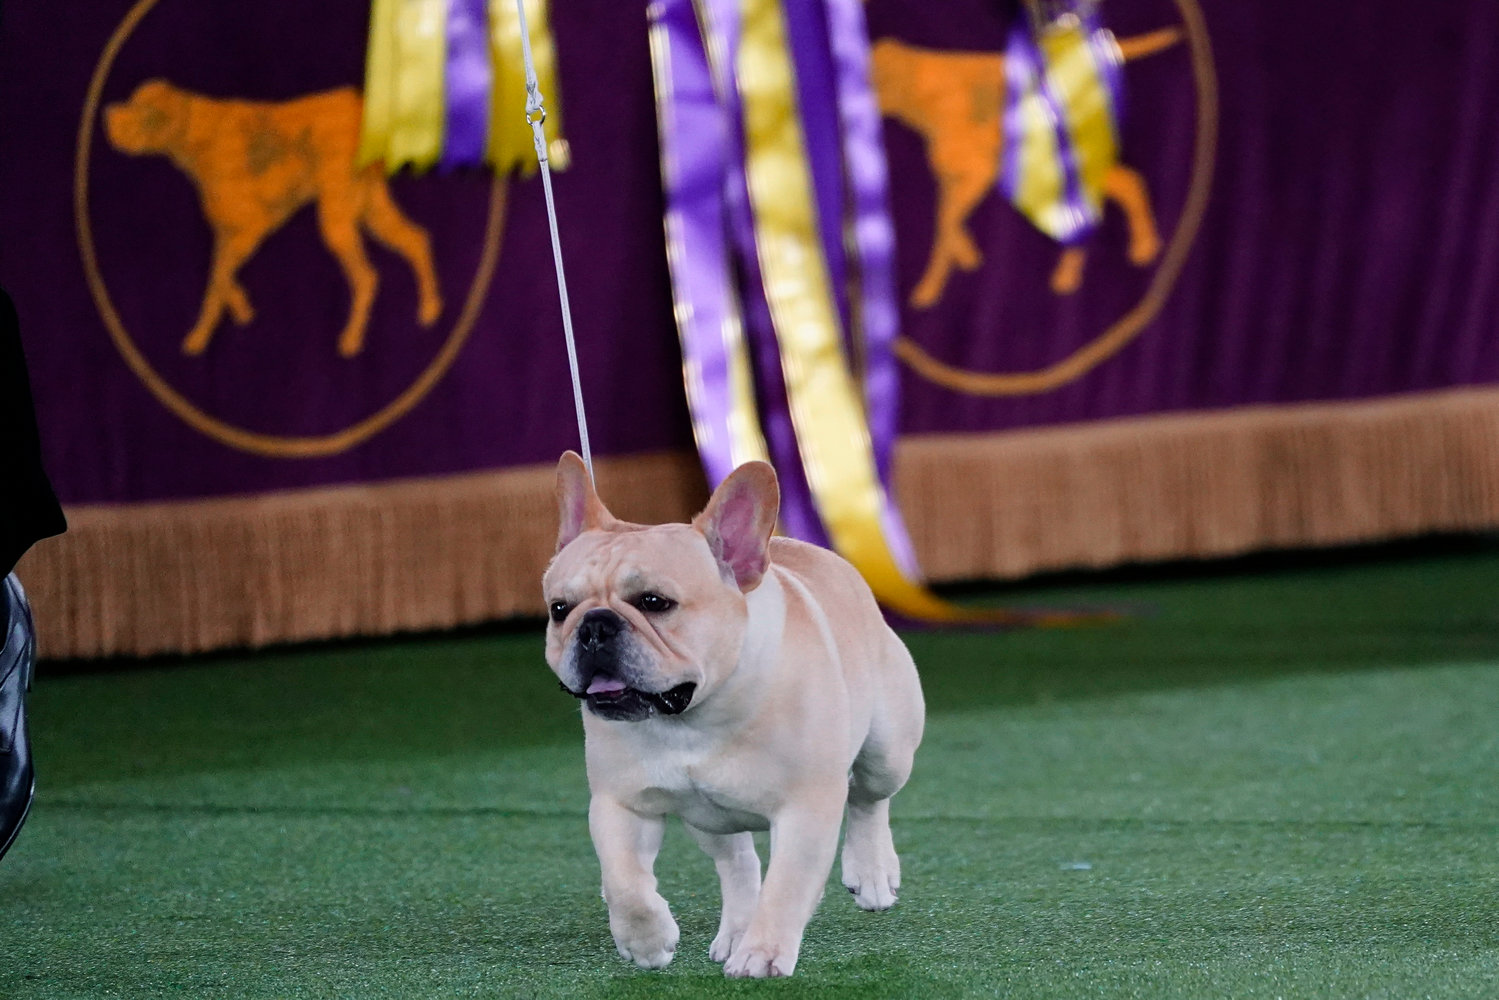 Winston, a French bulldog, competes for best in show at the 146th Westminster Kennel Club Dog Show, Wednesday, June 22, 2022, in Tarrytown, N.Y. (AP Photo/Frank Franklin II)